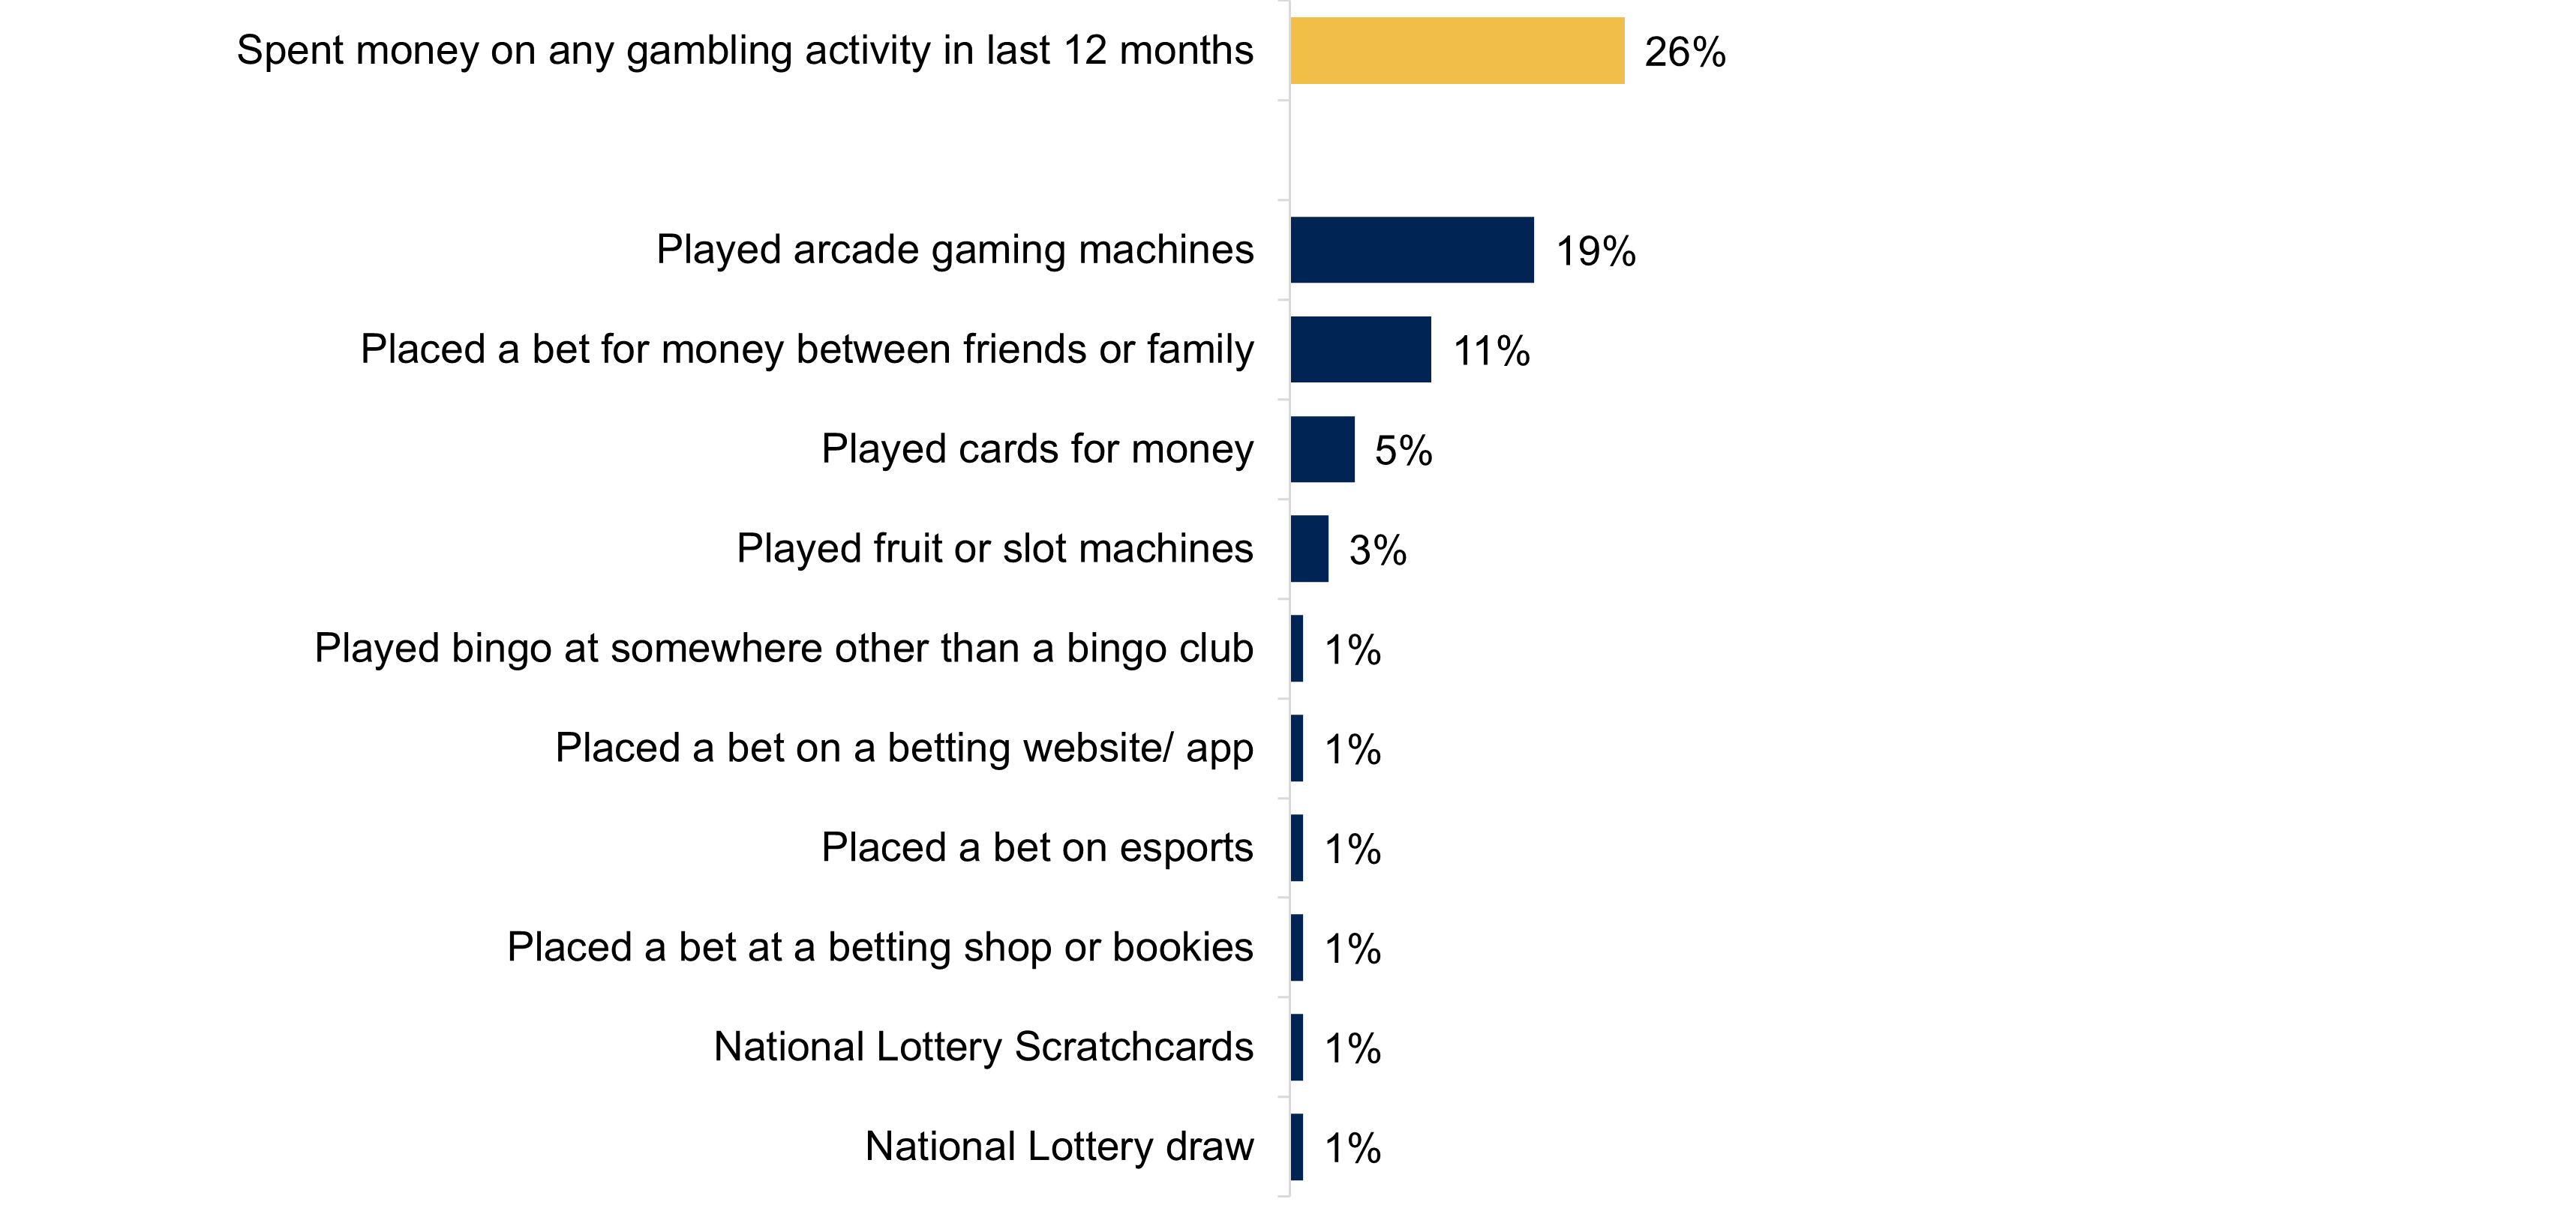 A bar chart showing the top ten gambling activities young people spent their own money on. Data from the chart is provided within the following table.